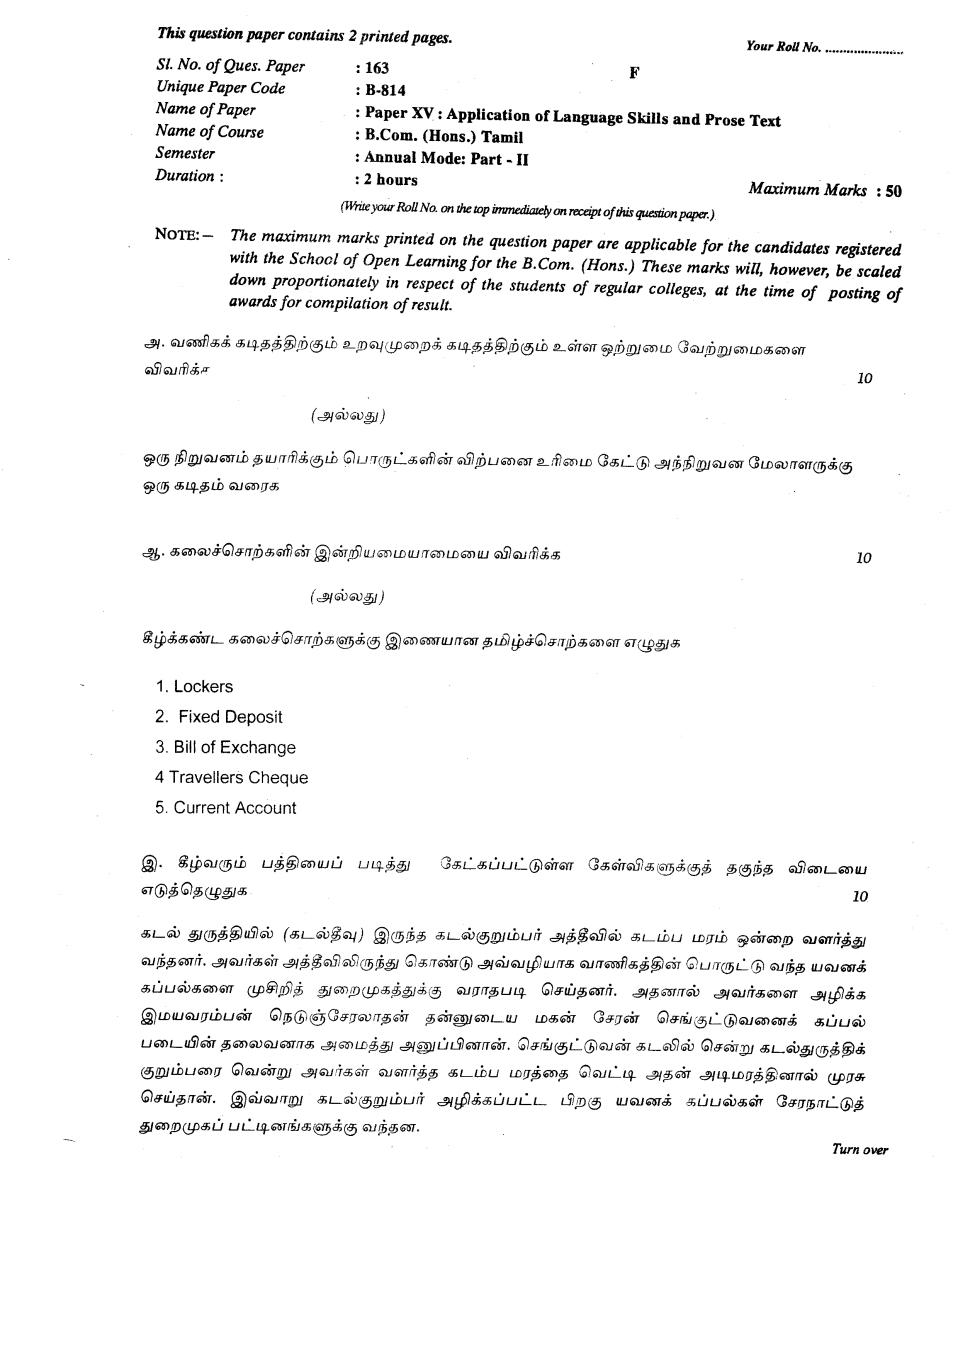 DU SOL Question Paper 2018 B.Com (Hons.) Tamil - Application of Language Skills and Prose Text - Page 1